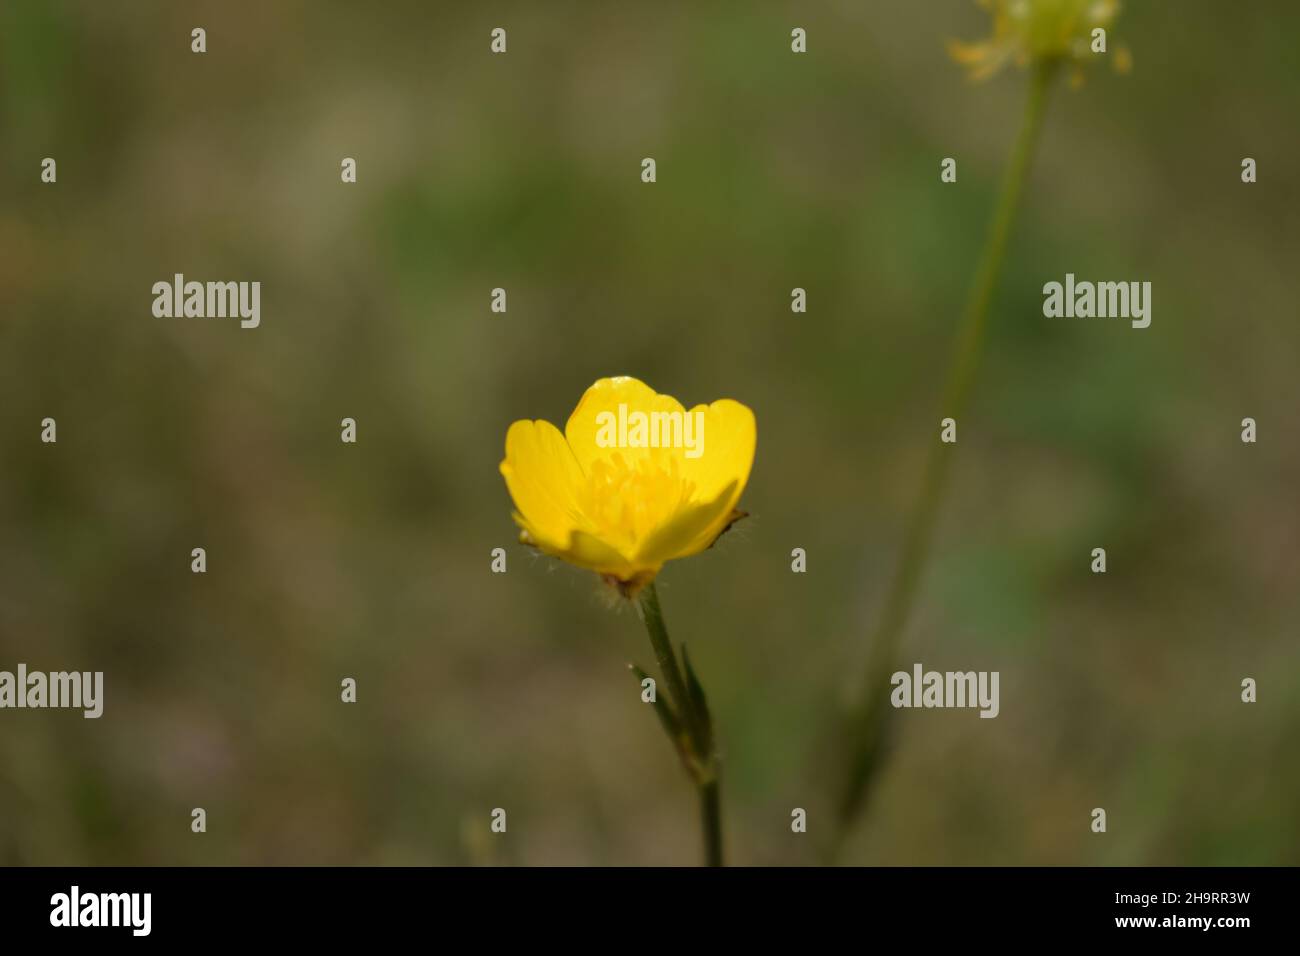 Creeping buttercup flower in the blurred background Stock Photo